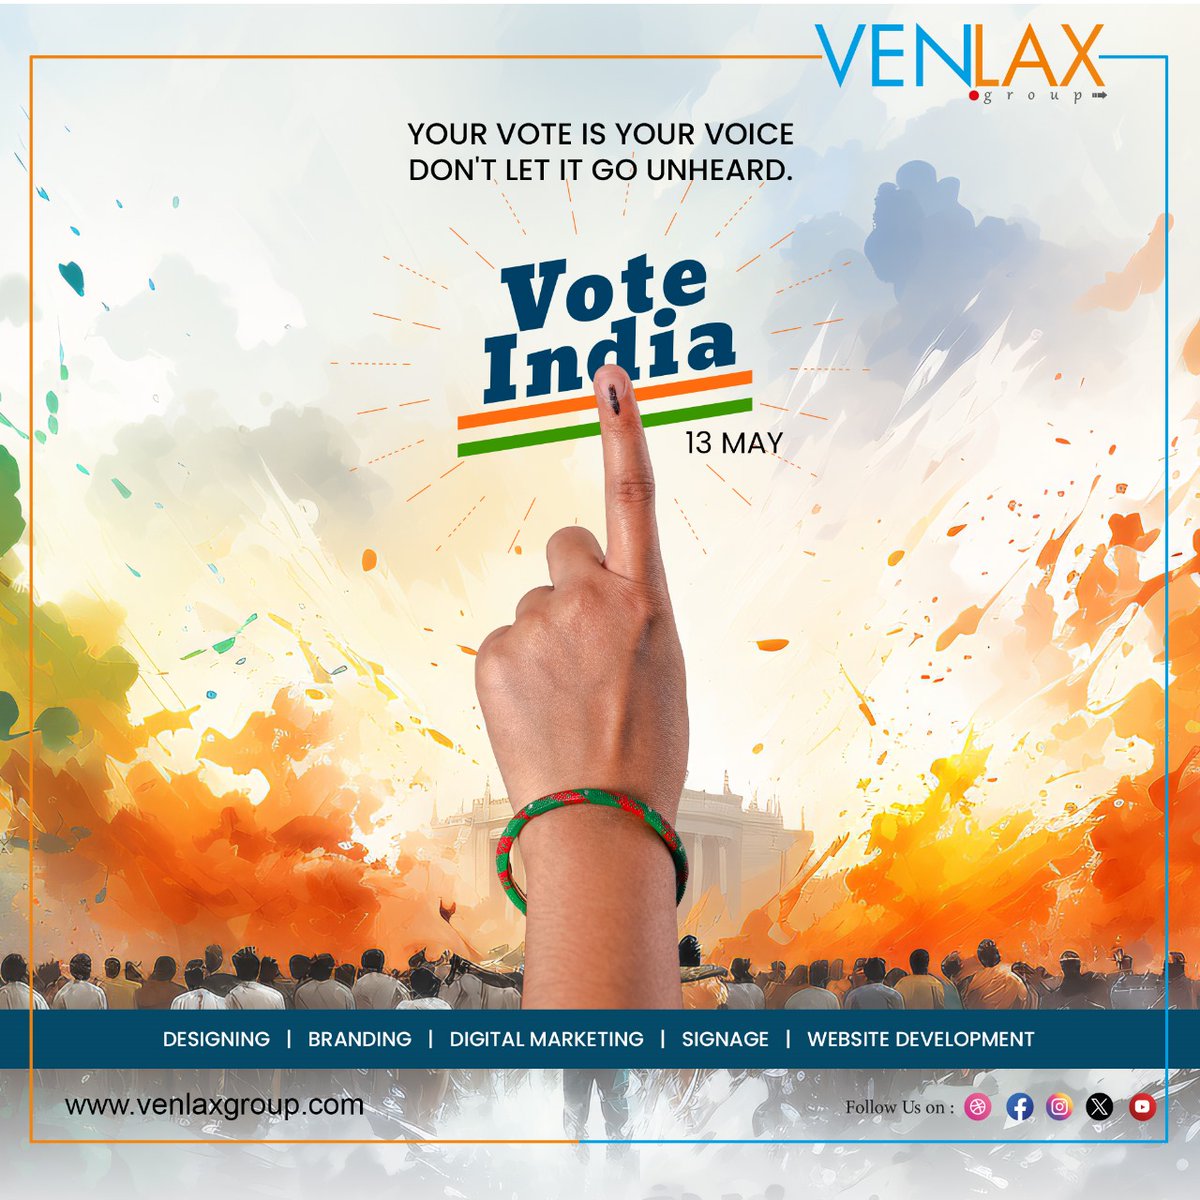 Voting is the Most Powerful Tool We Have to Create Change.

#VoteForChange #venlaxgroup #VoiceYourVote #BrighterFutureAhead #MakeYourMark #DemocracyInAction #ElectionDay